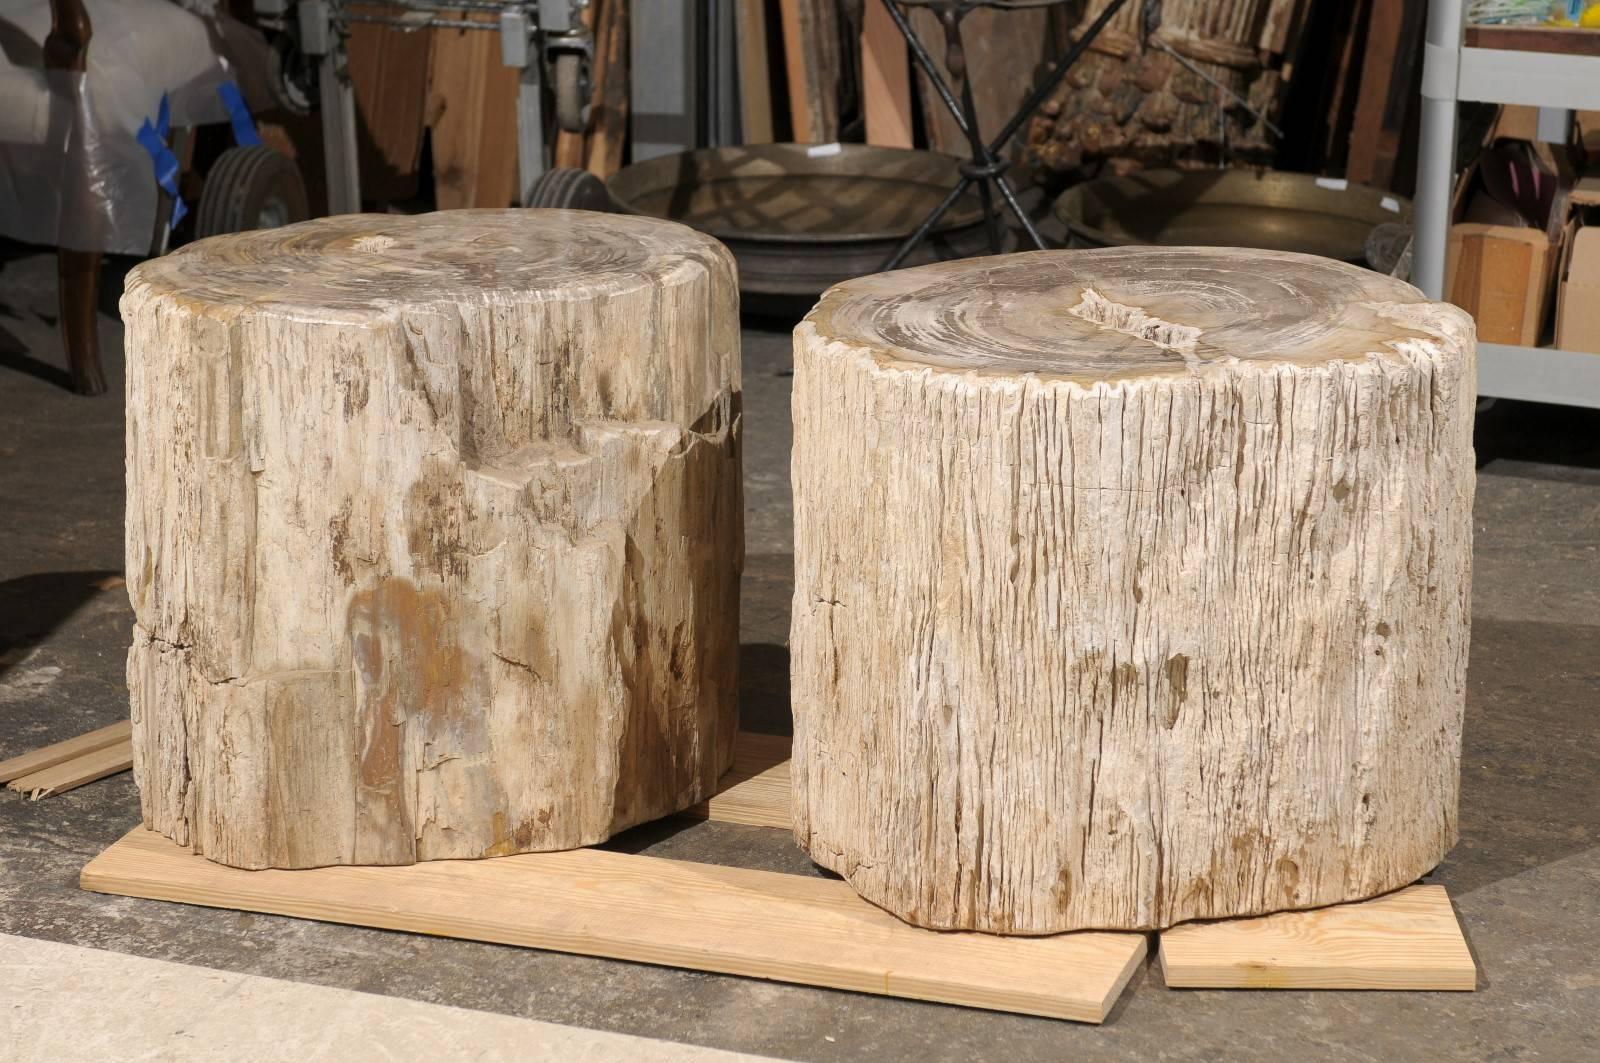 A pair of short yet wide petrified wood drinks, side tables. This pair of petrified wood drinks table’s features a beige color with light grey veins. While the sides show a rougher finish, the tops have been polished. Petrified wood is a fossil.